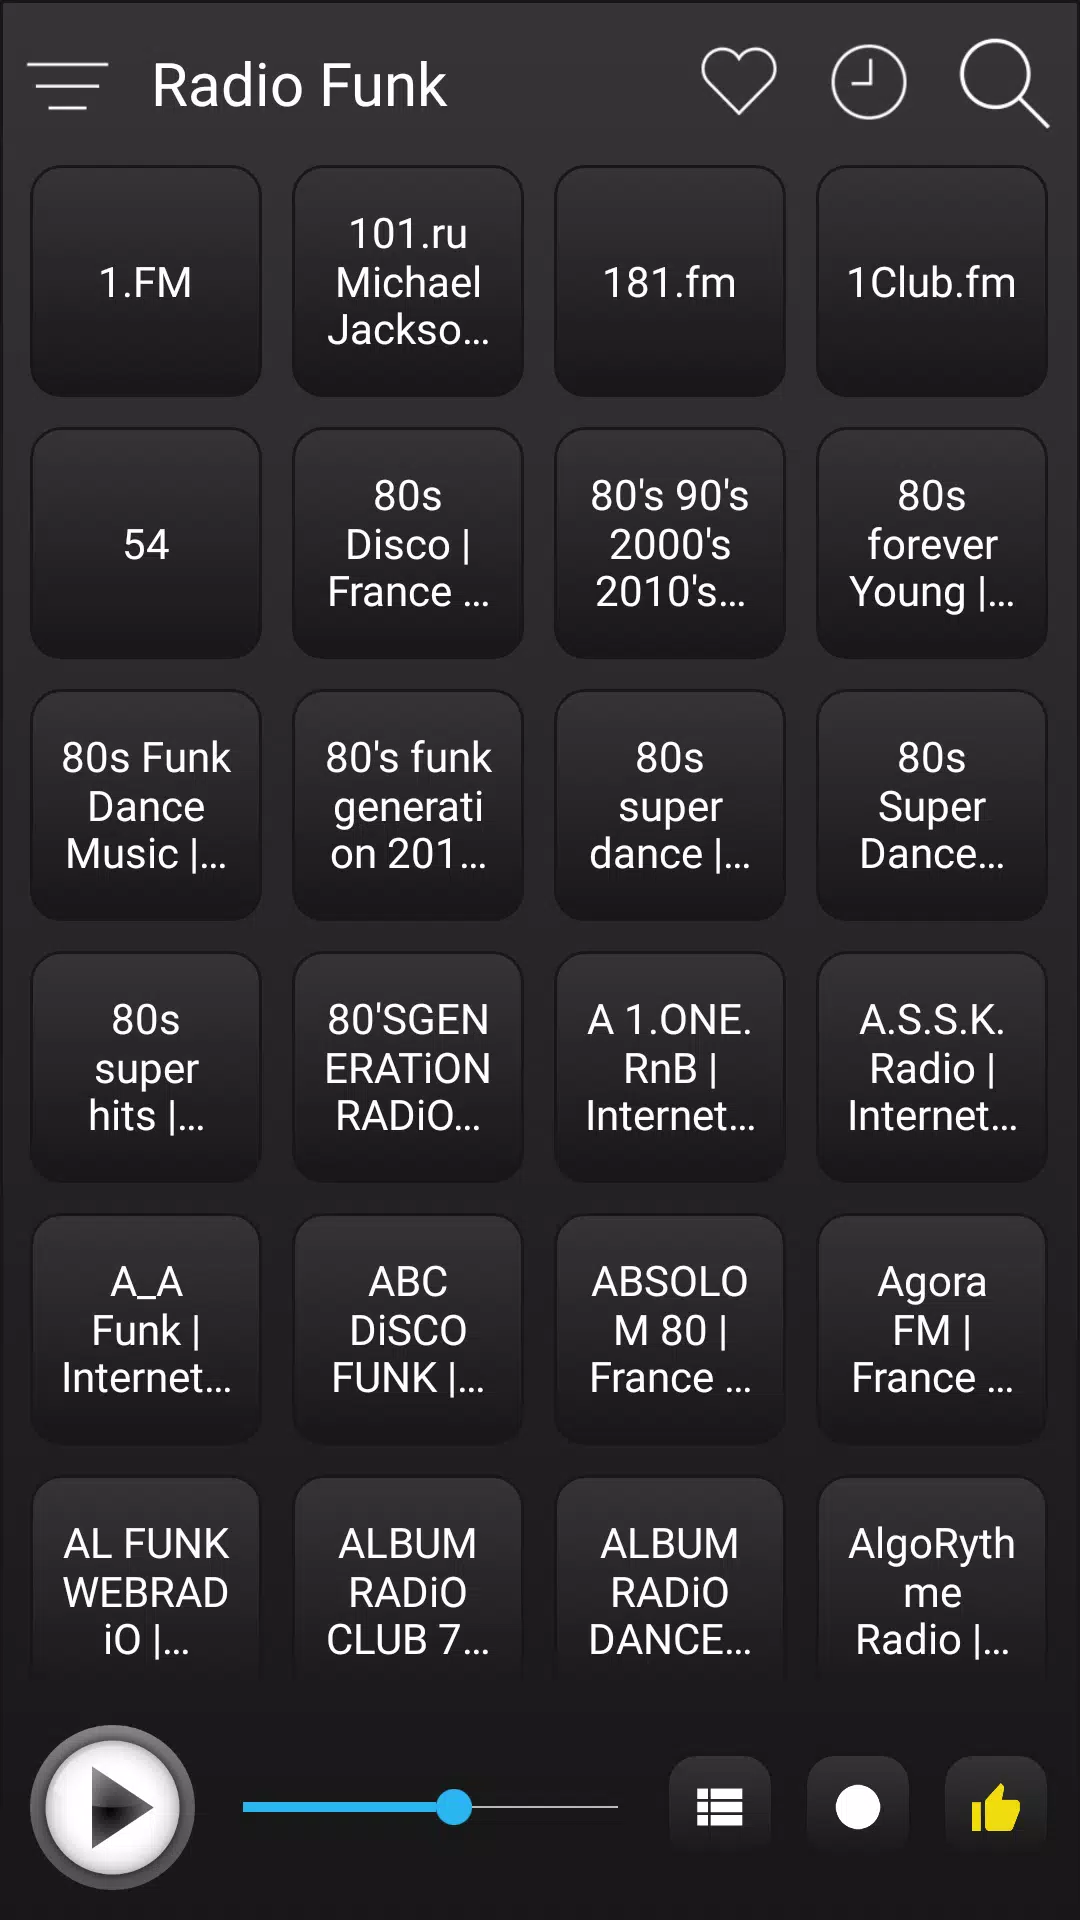 Funk Radio Station Online - Funk FM AM Music for Android - APK Download